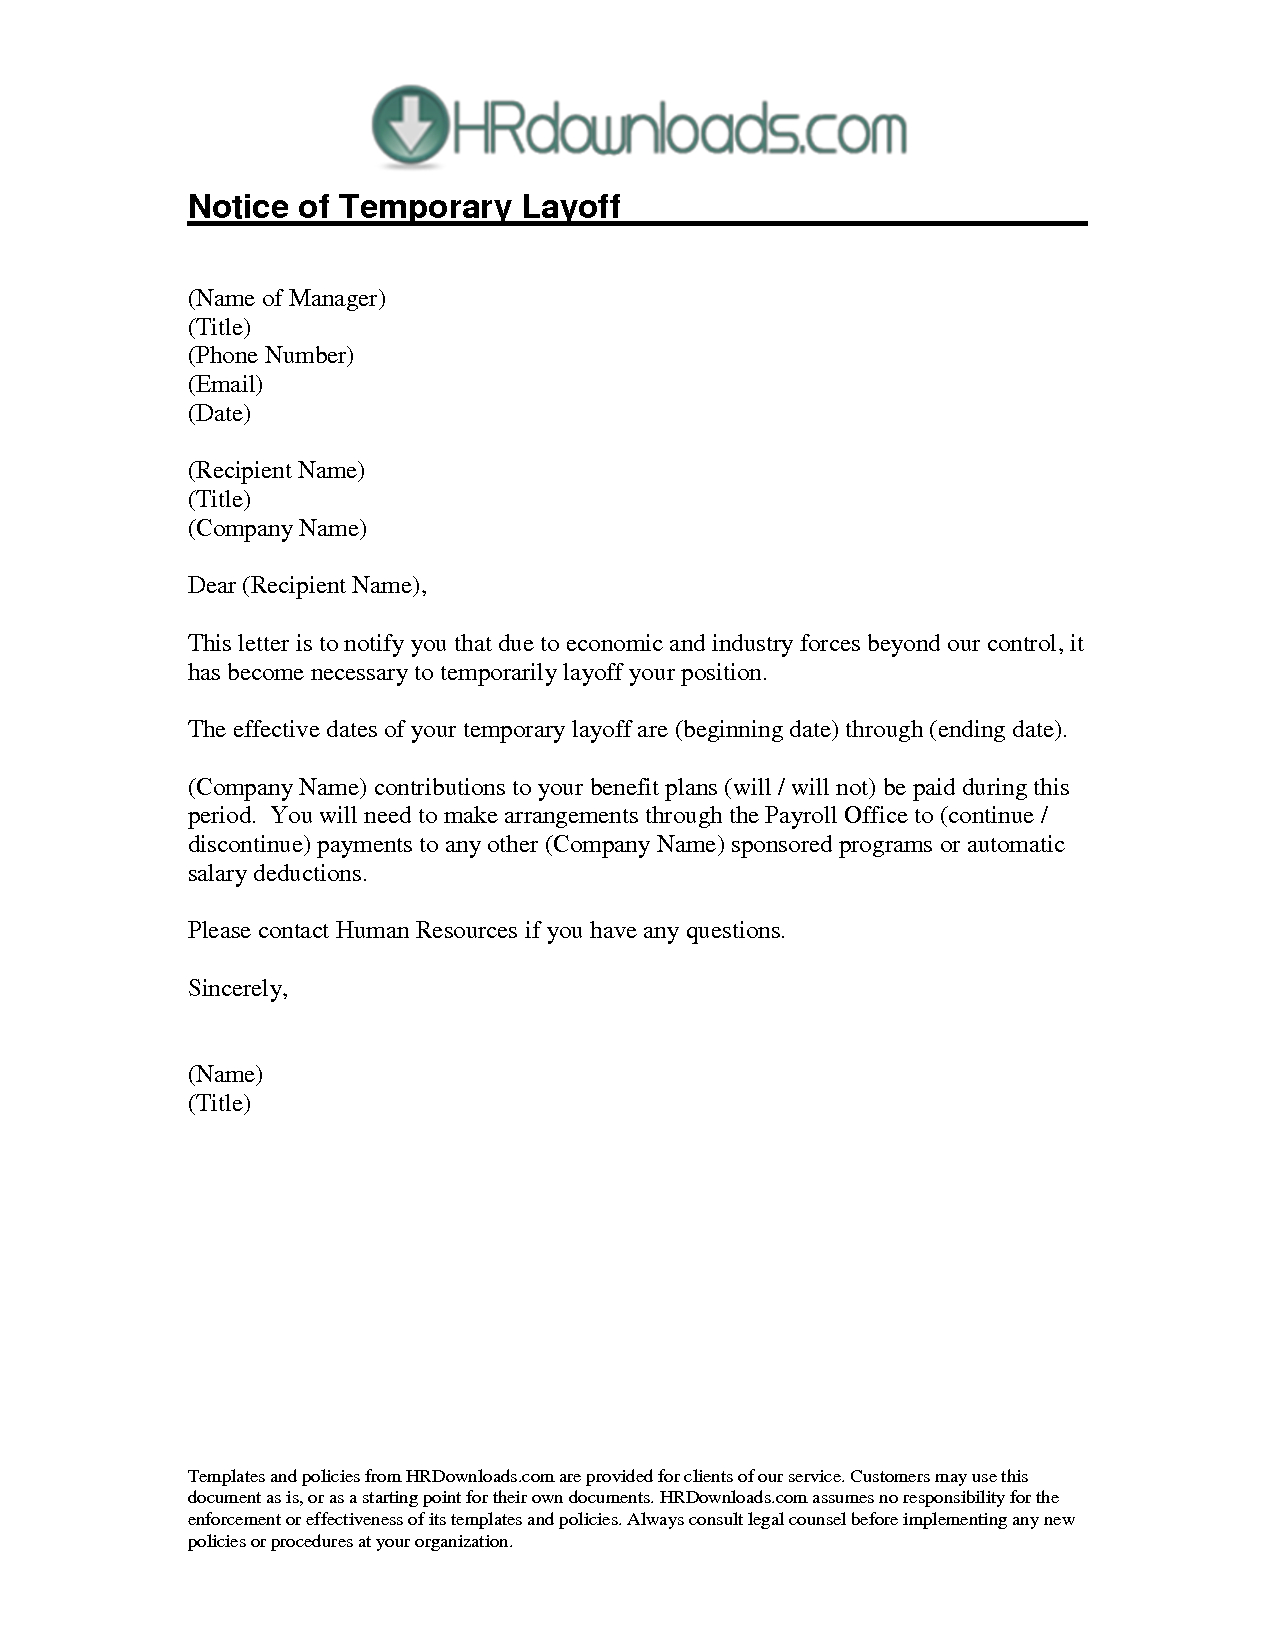 Layoff Letter Template - How to Write A Layoff Letter Image Collections Letter format